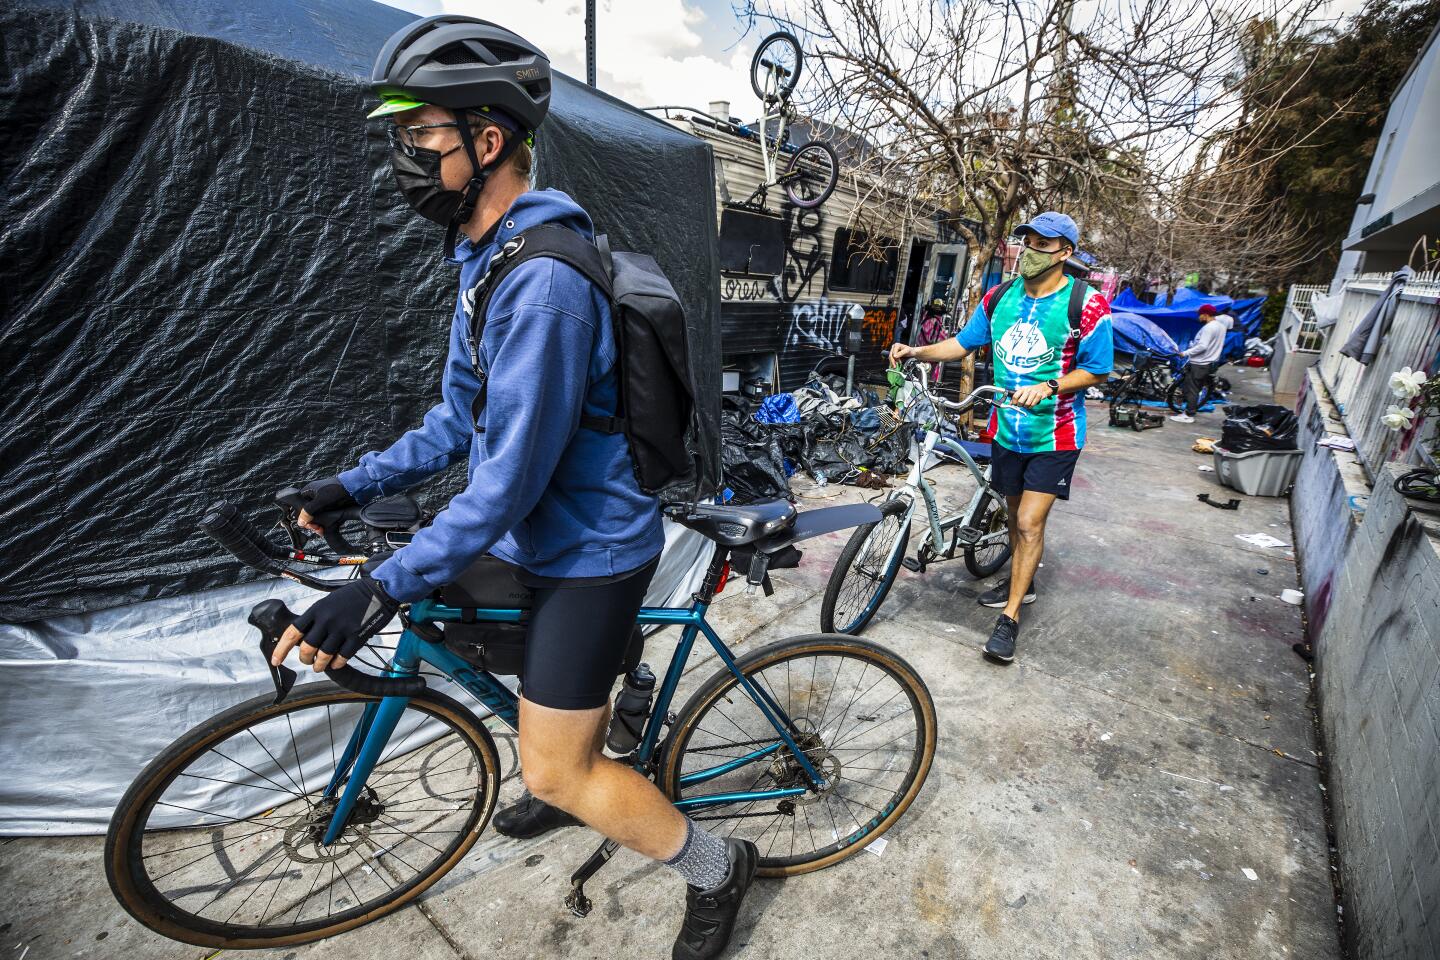 Bicycle Meals volunteers Kelly Wourms, left, and Max Banta leave a homeless encampment after delivering their last meals.